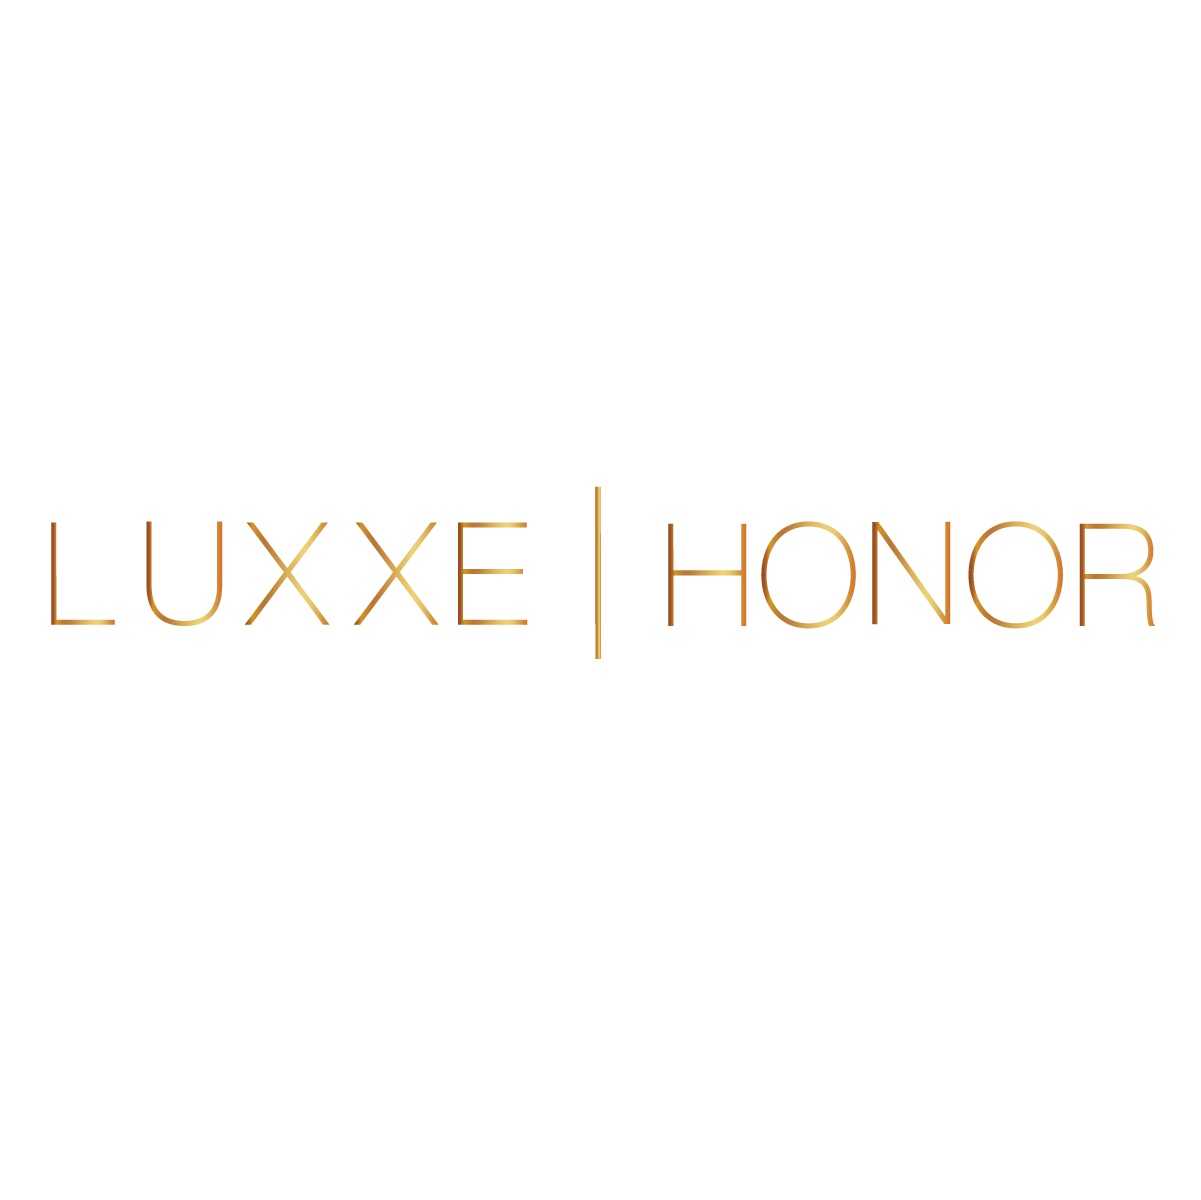 LUXXE HONOR